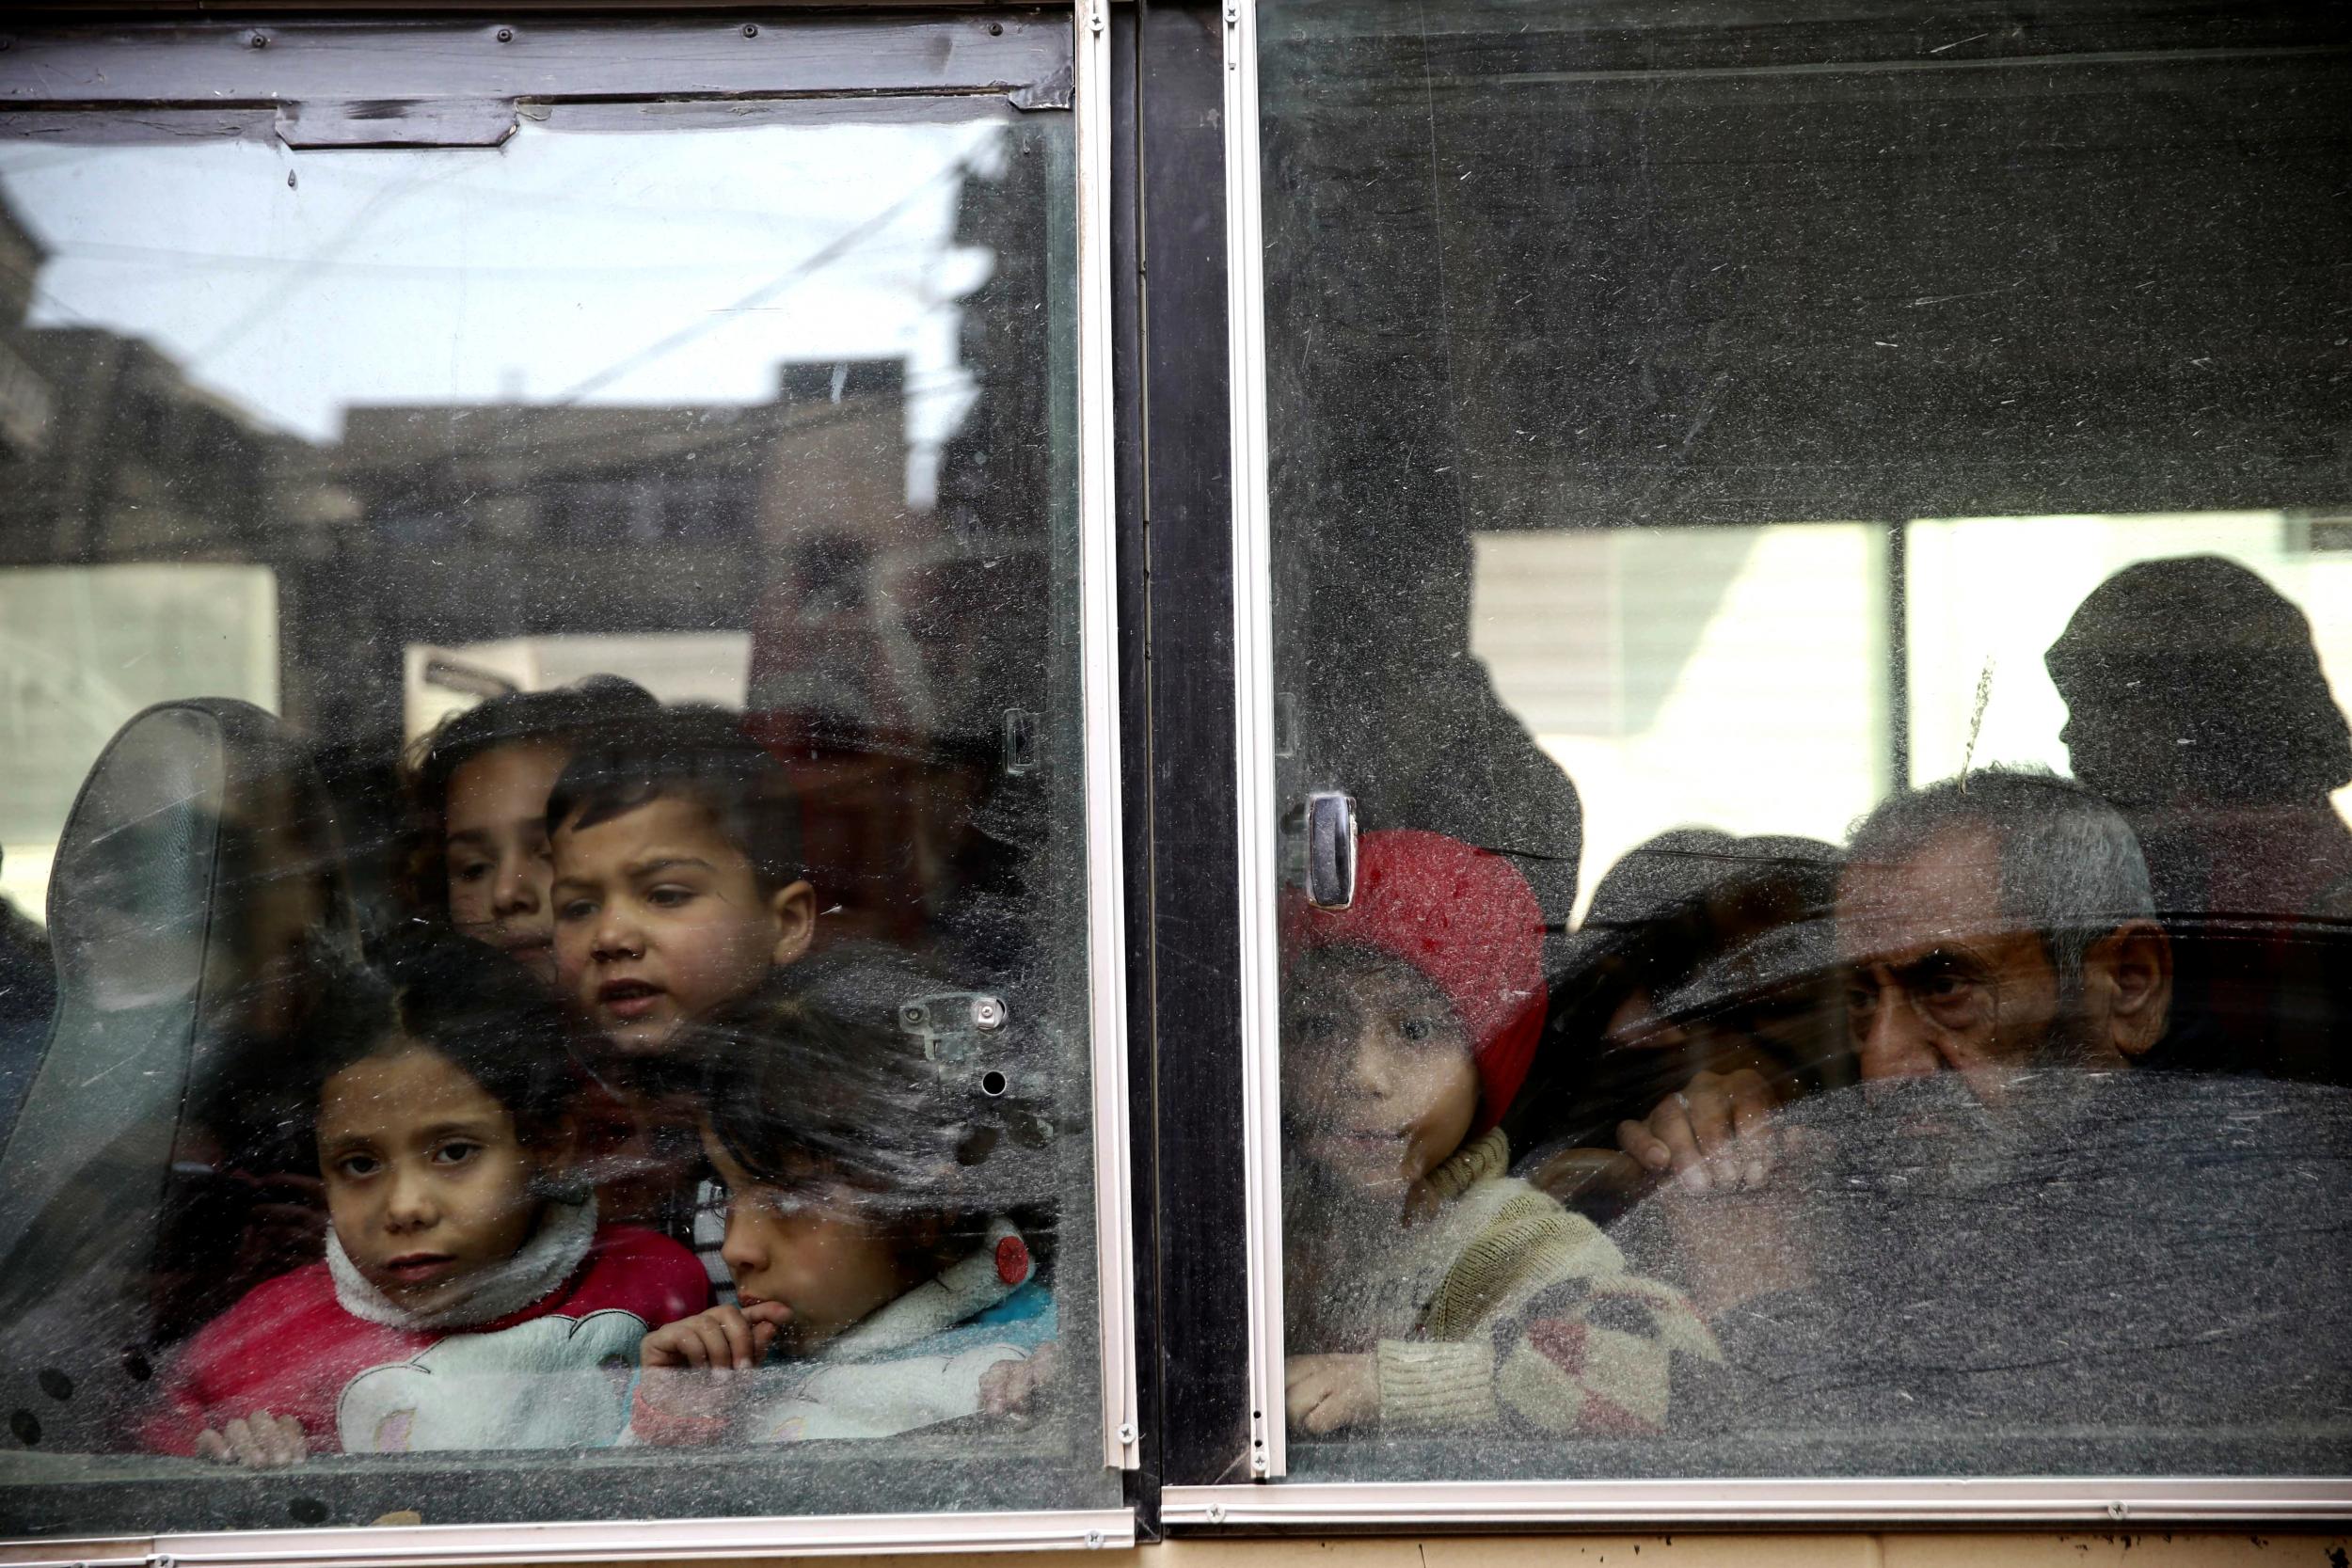 Children look through a bus window during a medical evacuation from the besieged town of Douma in eastern Ghouta on 13 March 2018